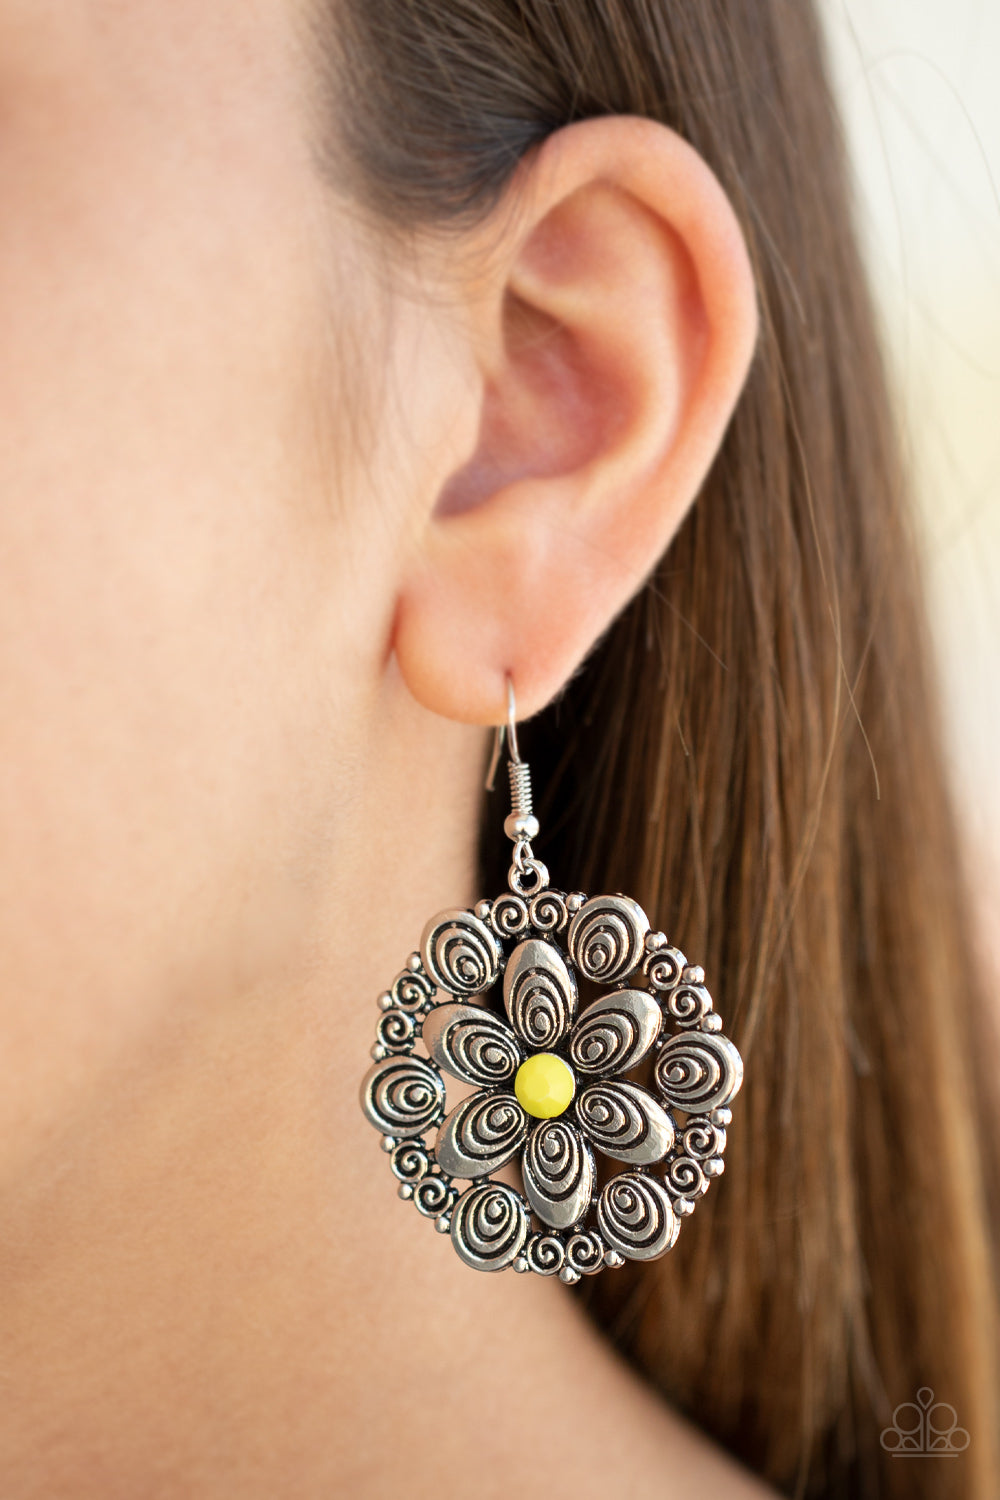 Paparazzi Grove Groove - Yellow Beads - Flowery Silver Frame - Earrings - $5 Jewelry with Ashley Swint